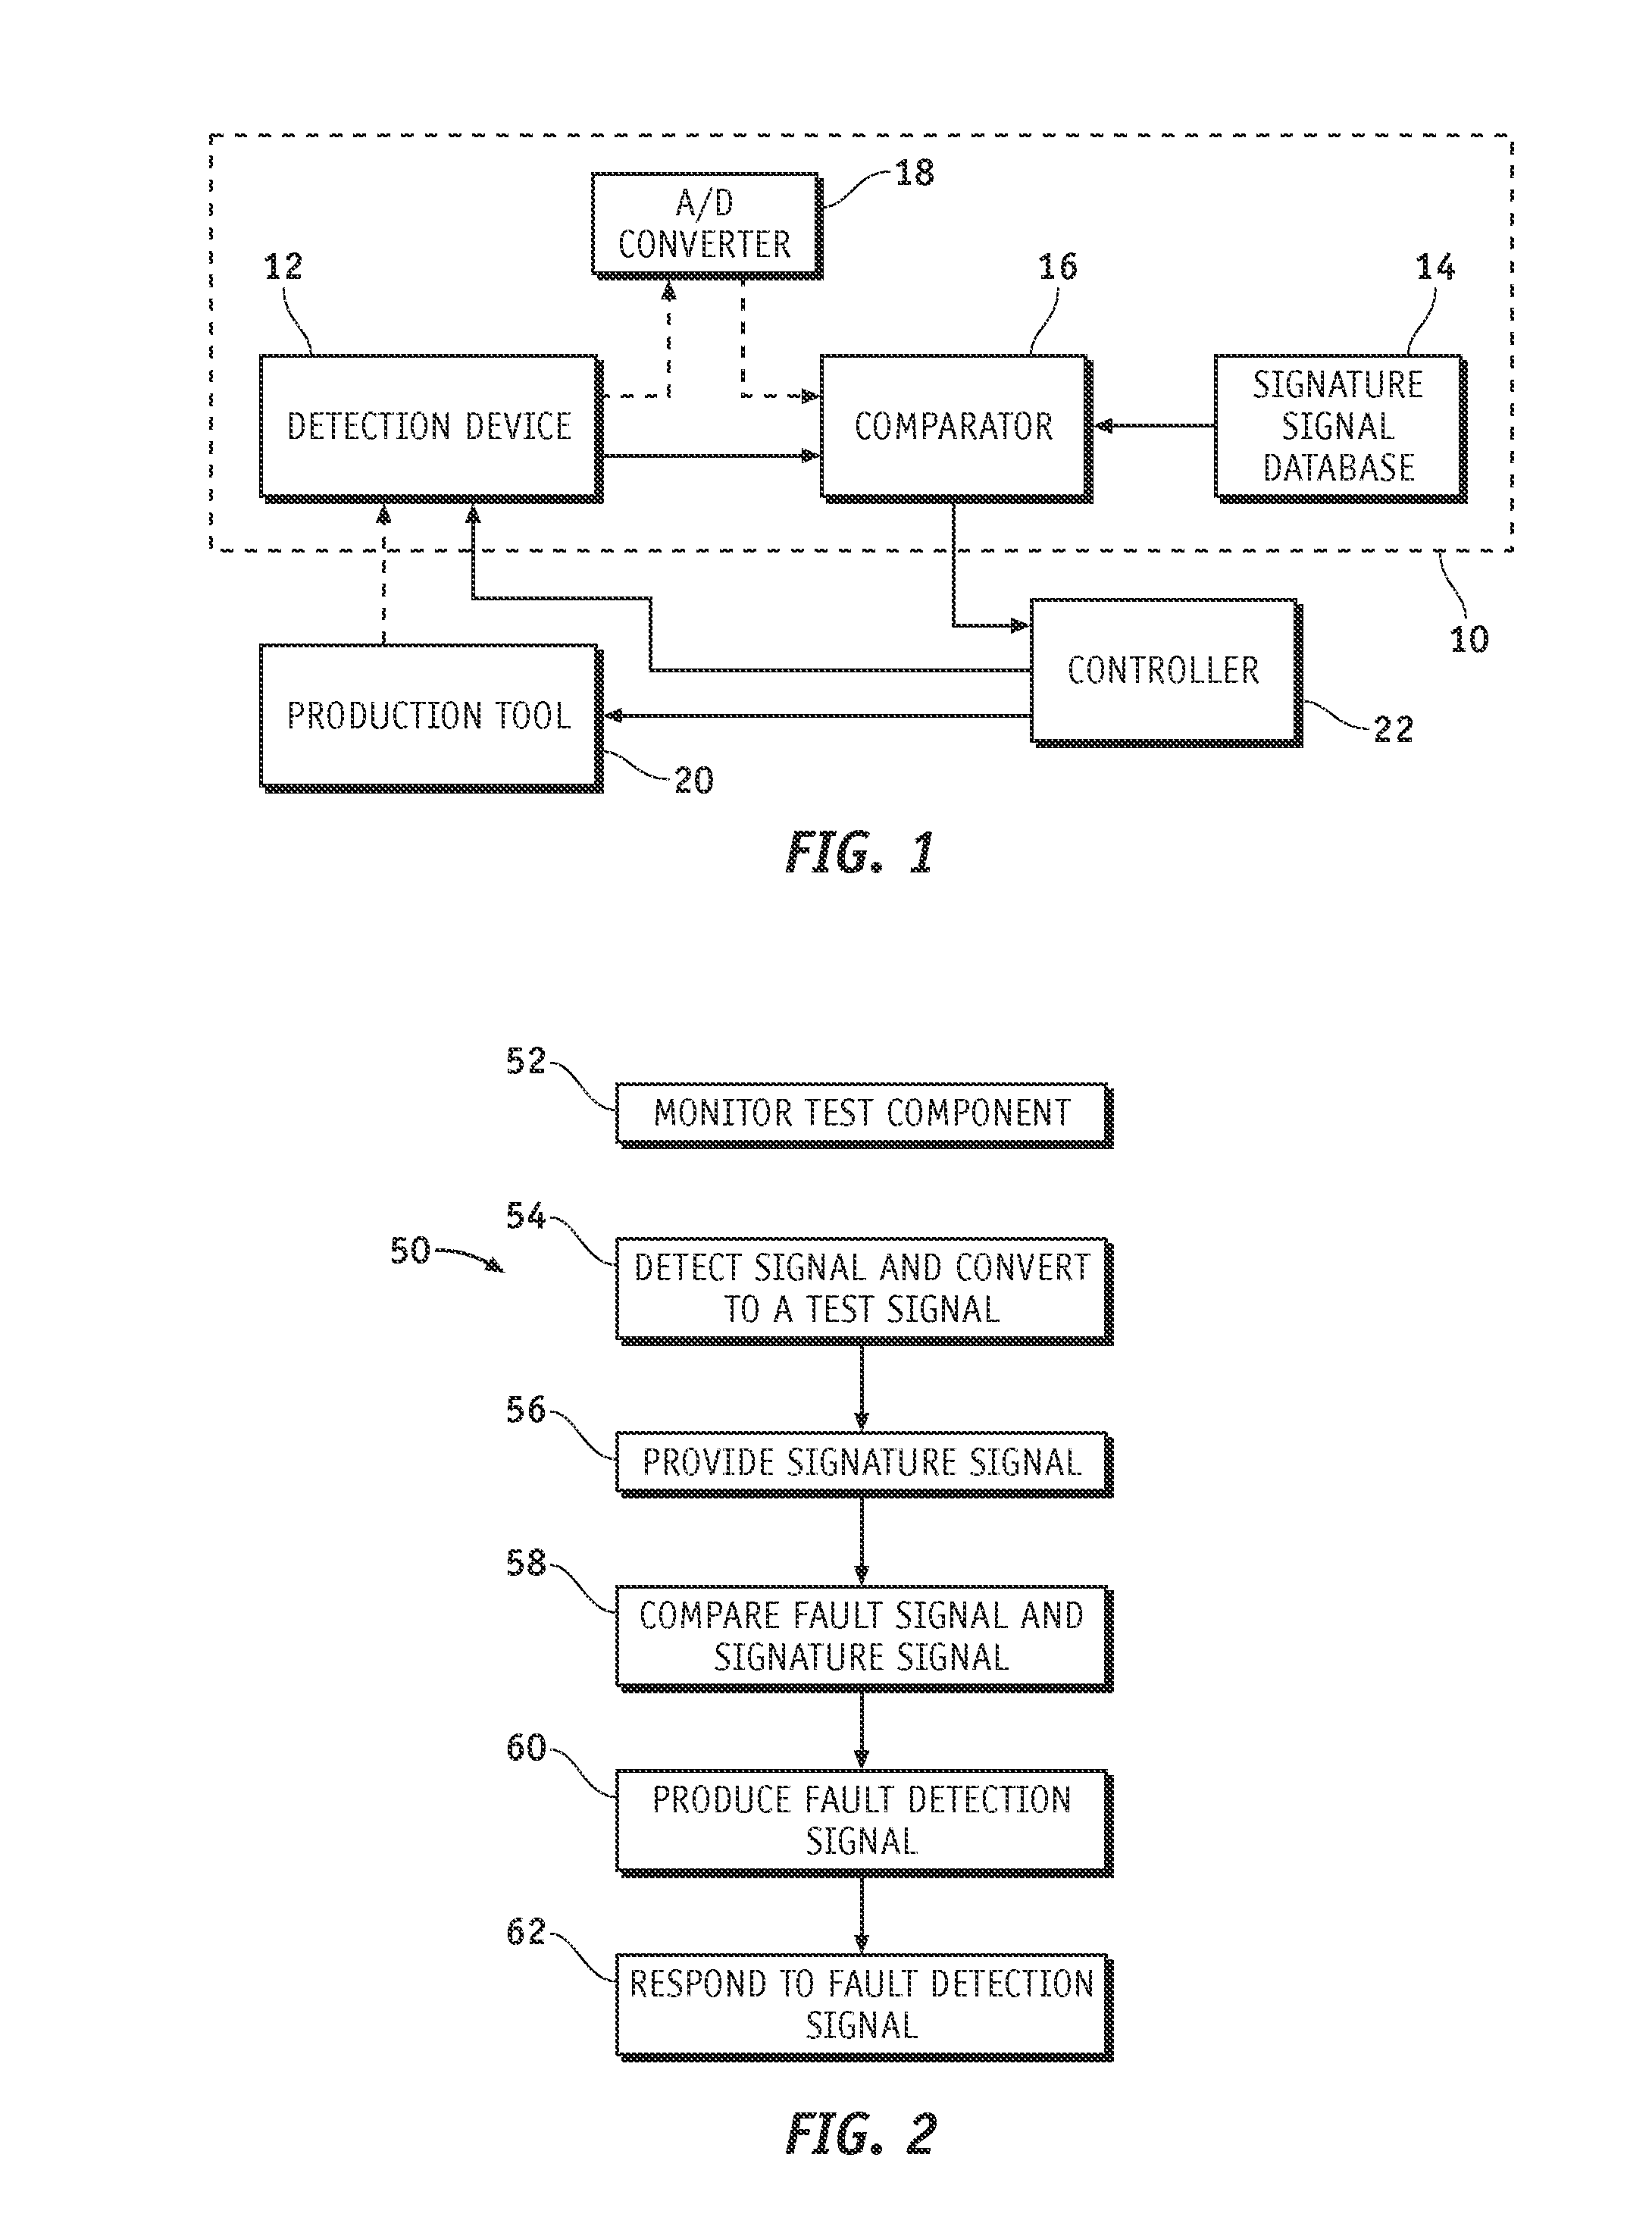 Fault detection apparatuses and methods for fault detection of semiconductor processing tools